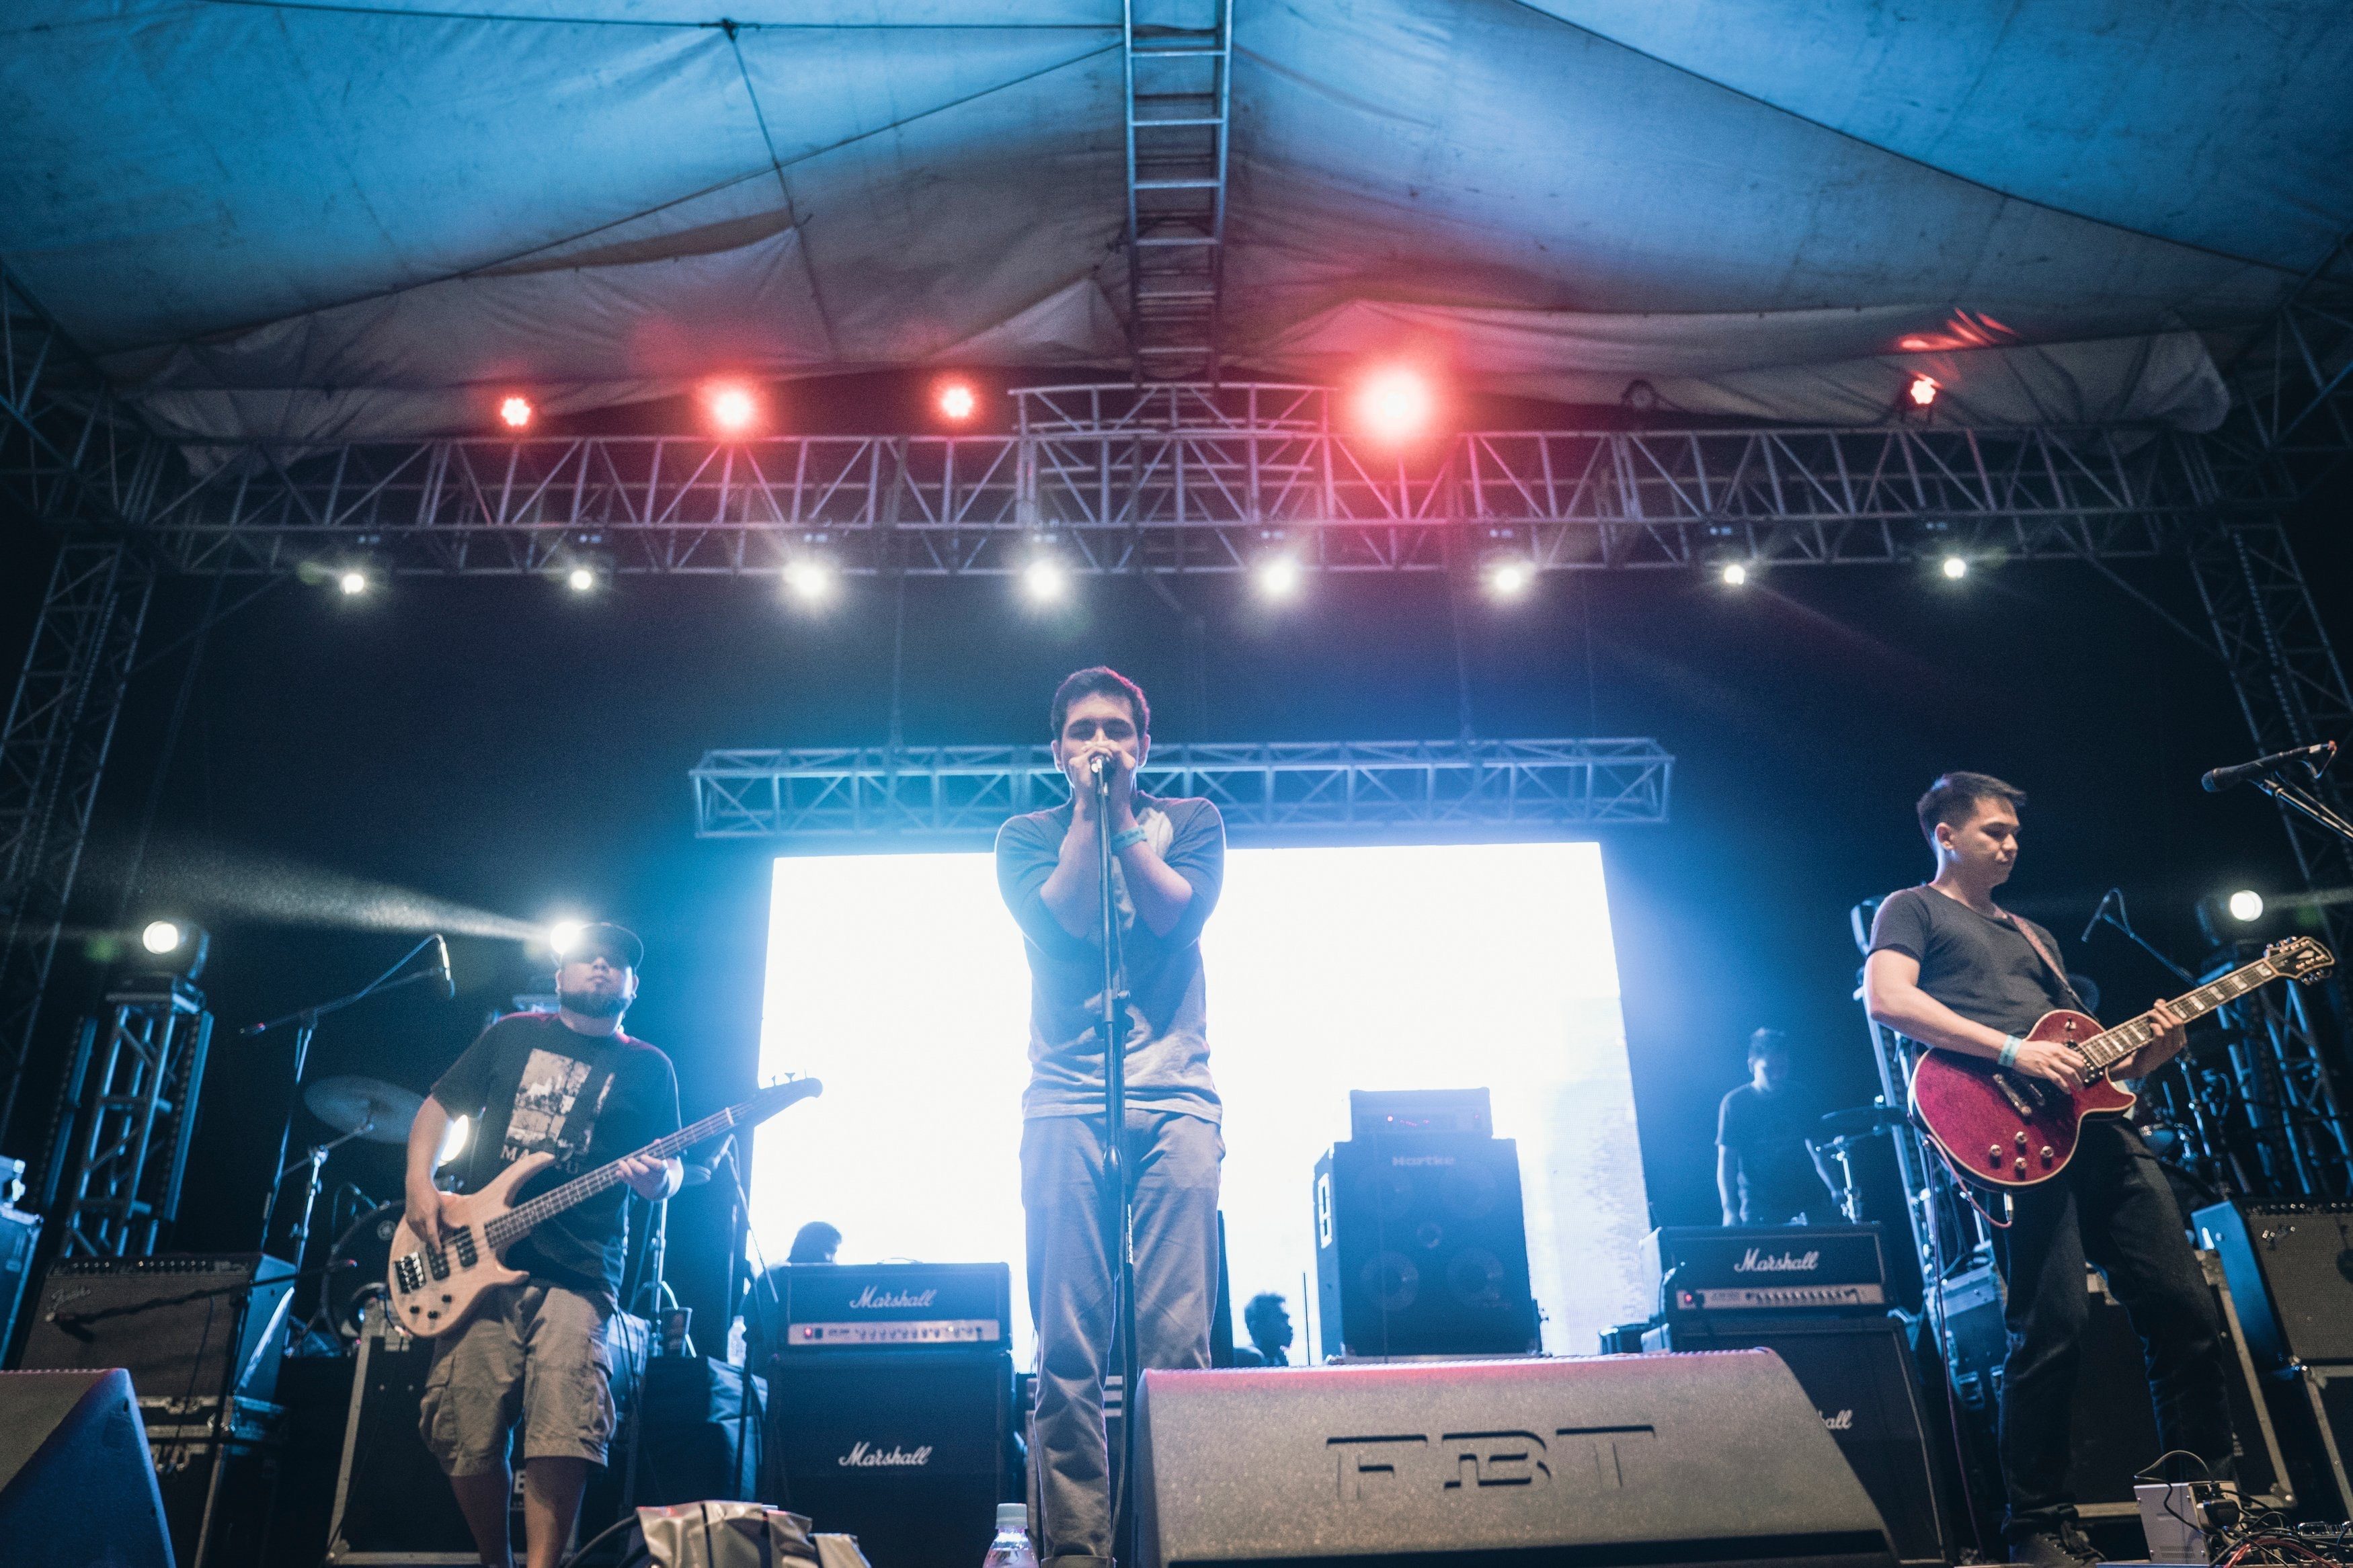 LISTEN: Dicta License’s ‘Inosenteng Bala’ is a call to stand up against tyranny